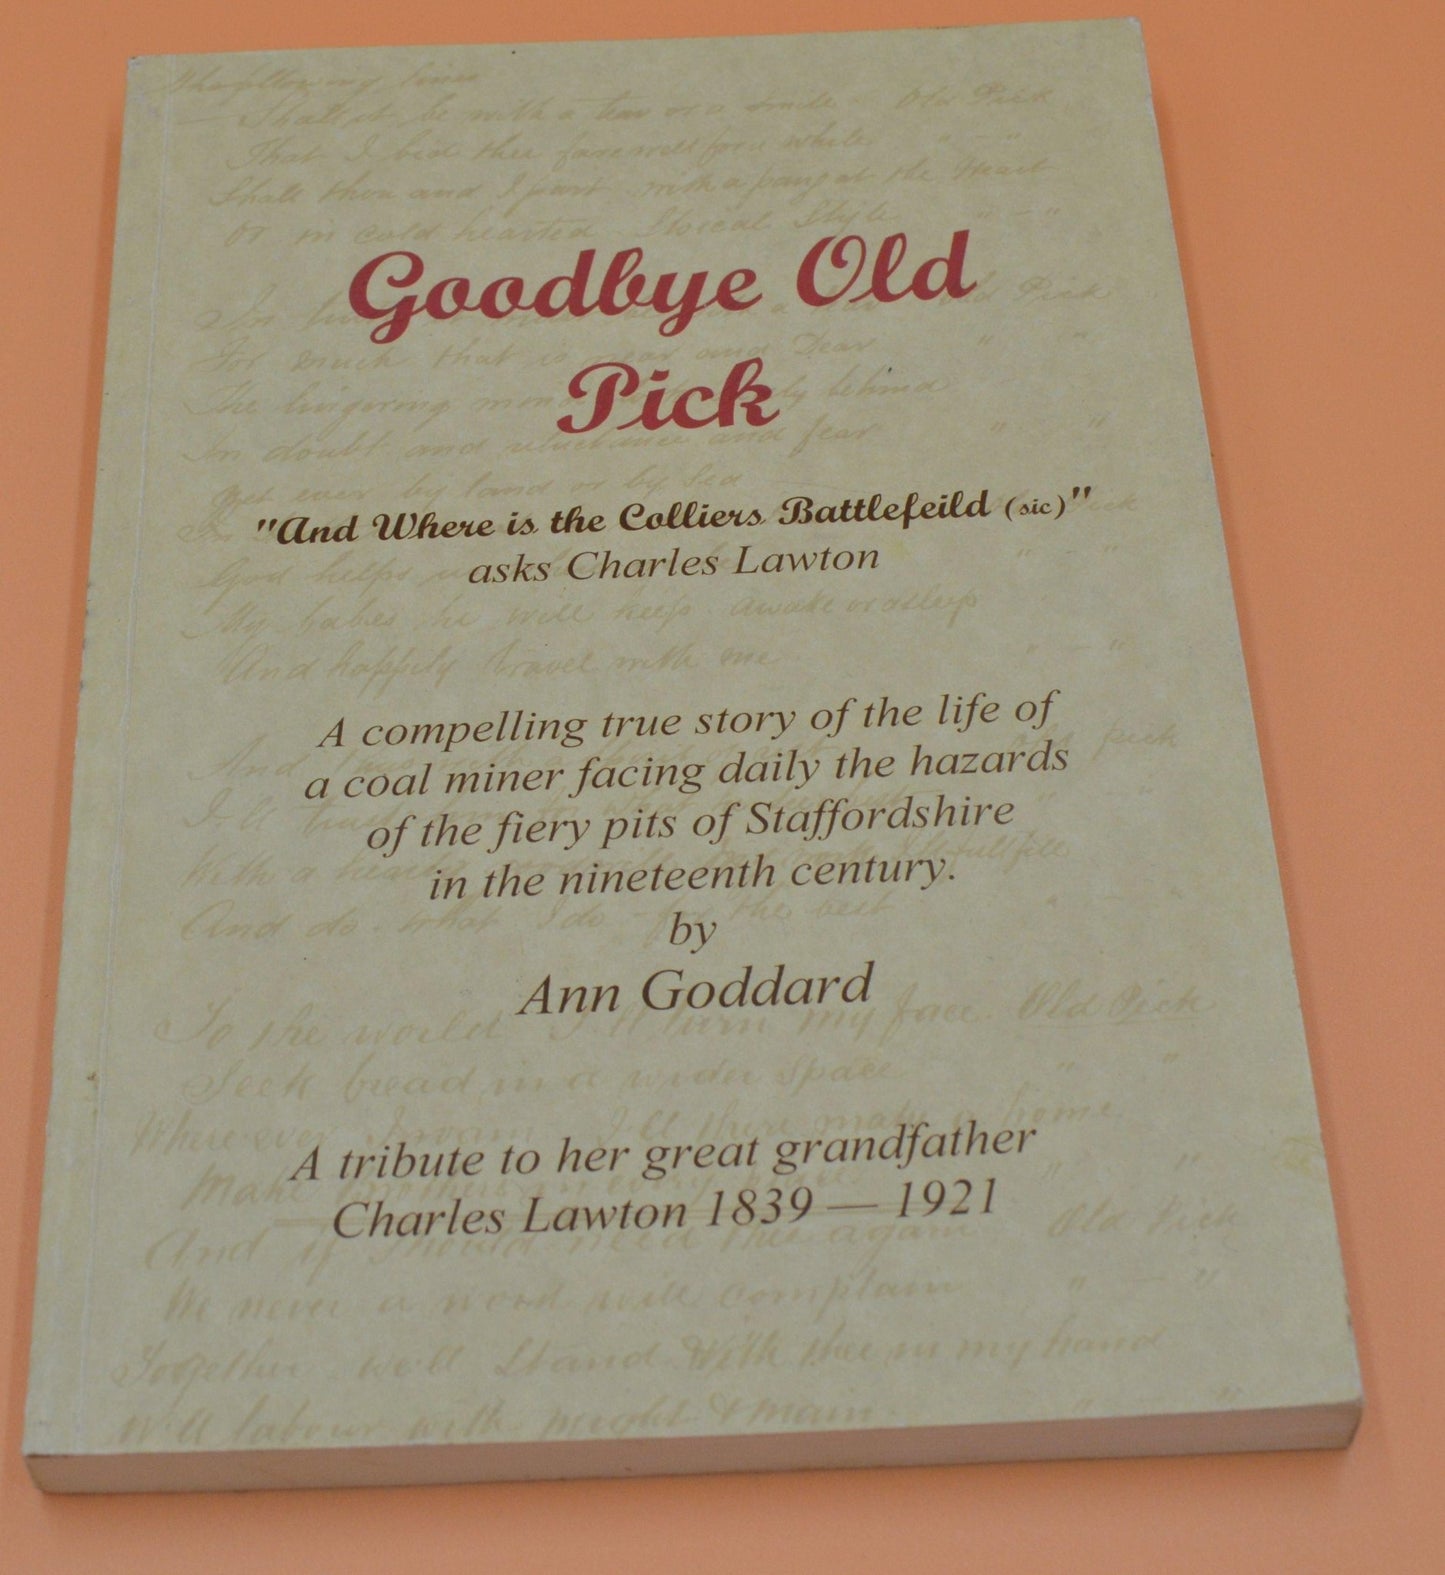 SECONDHAND BOOK GOODBYE OLD PICK by ANN GODDARD - TMD167207